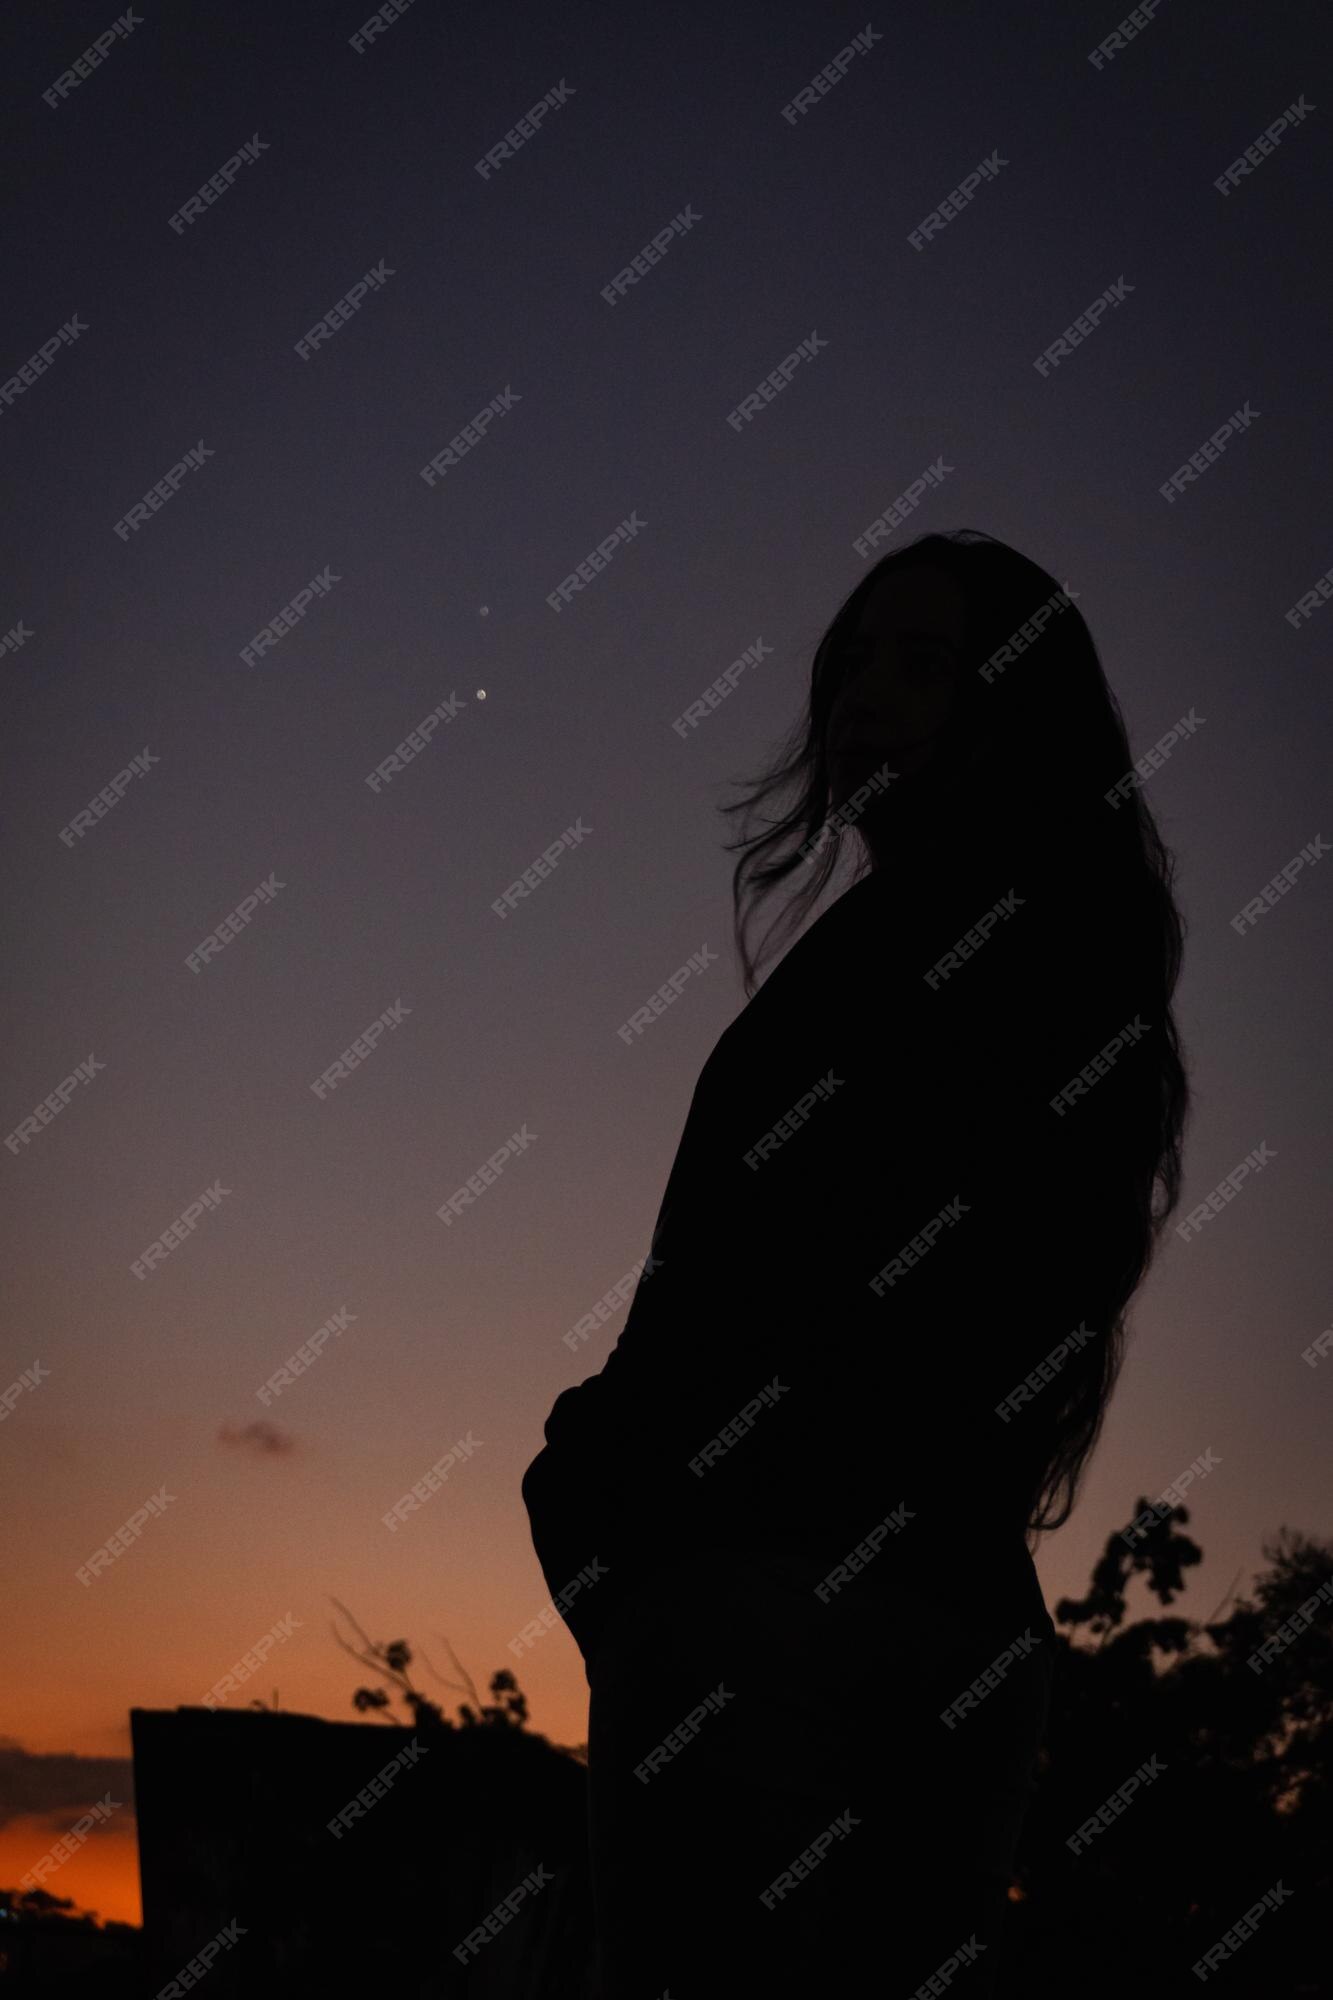 Sad Female Profile Silhouette On Stars Sky, Monochrome Image Stock Photo,  Picture and Royalty Free Image. Image 52073129.